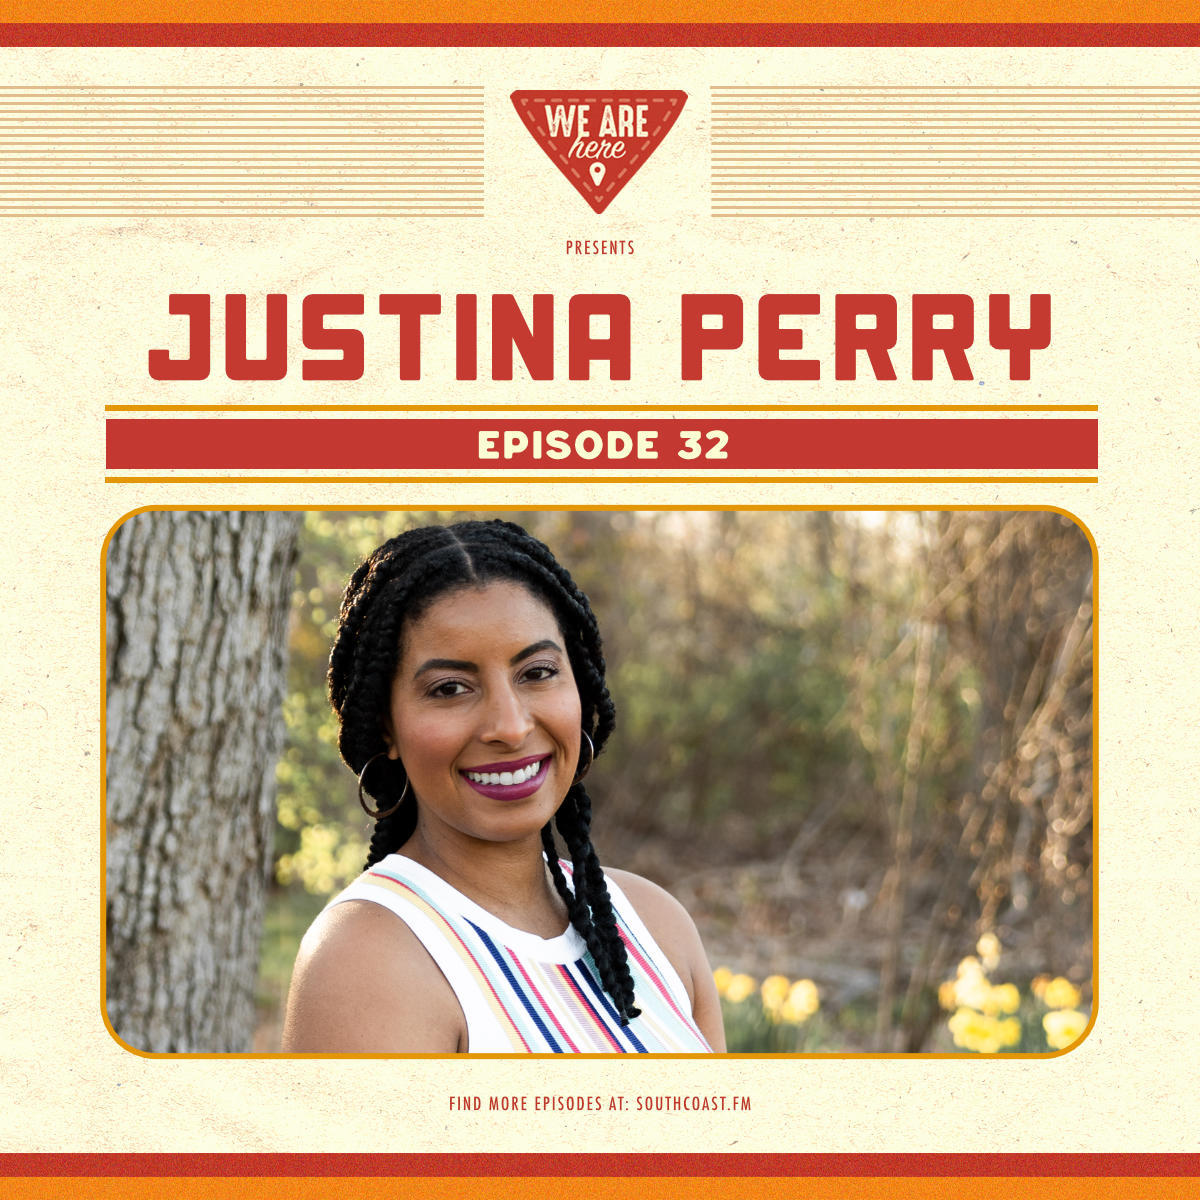 Buy Black NB: Justina Perry on building community